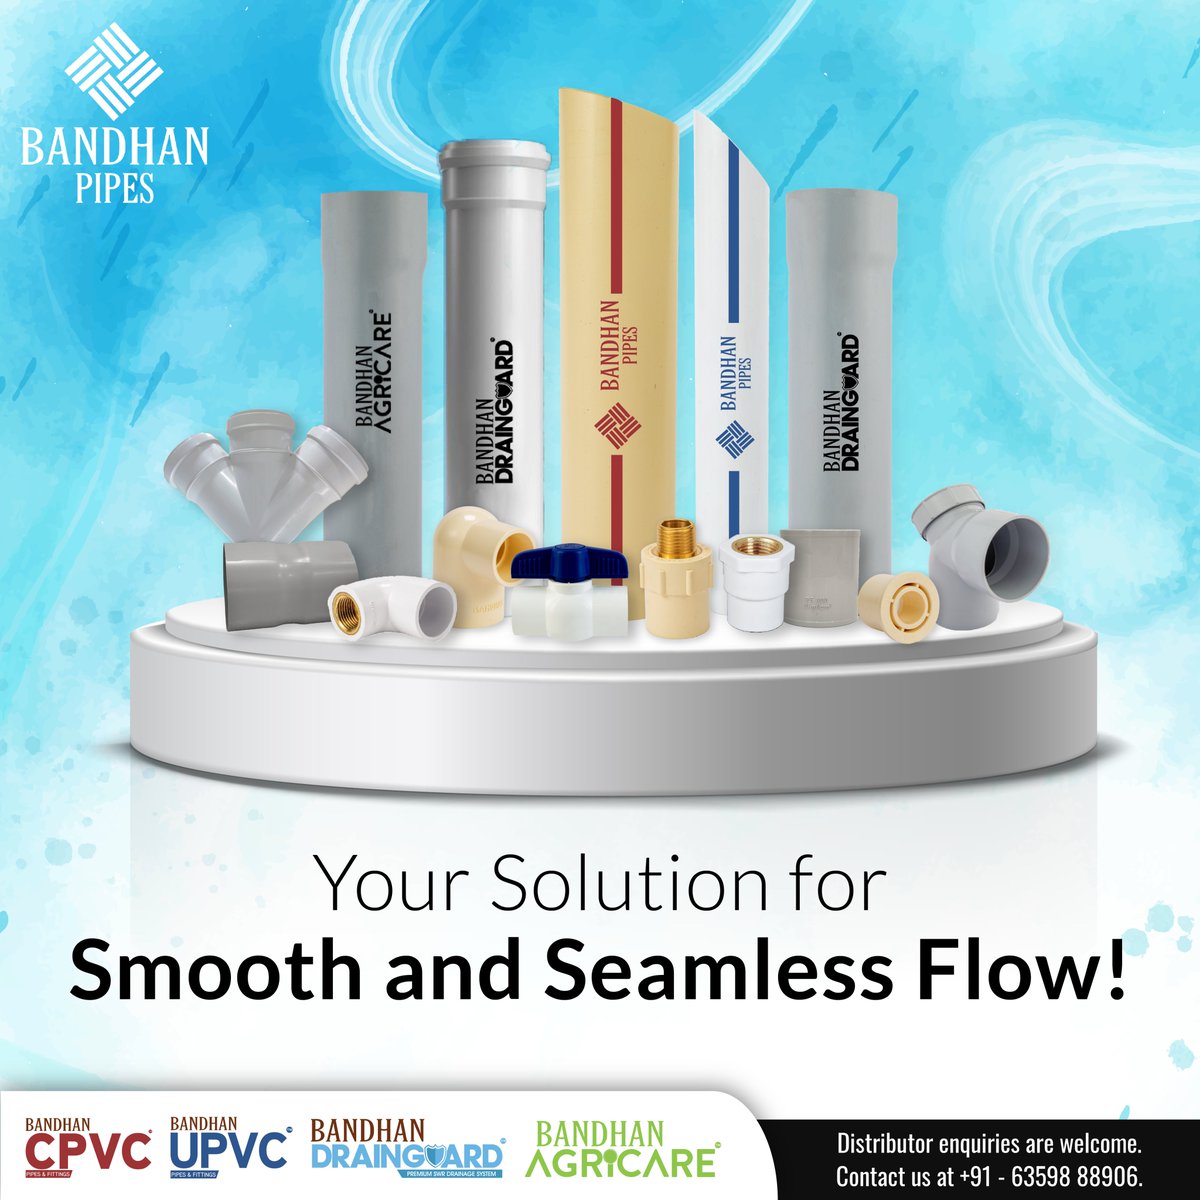 Guaranteed to flow seamlessly, Bandhan Pipes ensures a plumbing experience like no other. Trust in perfection, trust in Bandhan! . . #bandhanpipes #drainguard #SochoBandhanPipes #pipes #plumbing #pvc #pvcpipes #industry #cpvc #upvc #swr #waterpipes #water #watersupply #products